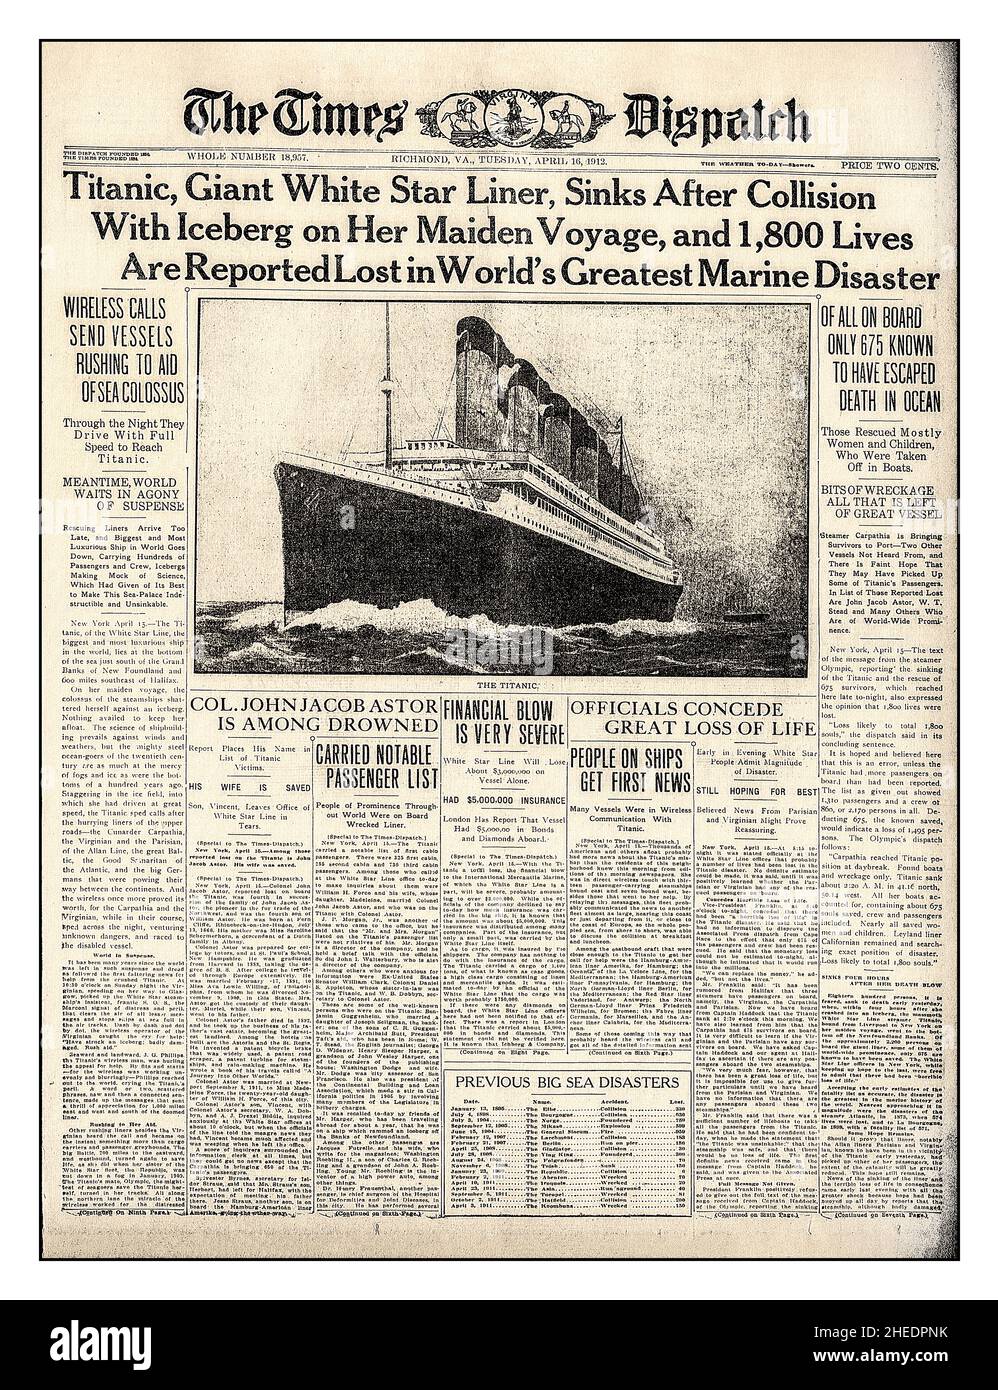 TITANIC sinking newspaper headline THE TIMES DISPATCH Richmond VA USA April 16th 1912 'Titanic, Giant White Star Liner, Sinks After Collision With Iceberg On Her Maiden Voyage.... Stock Photo